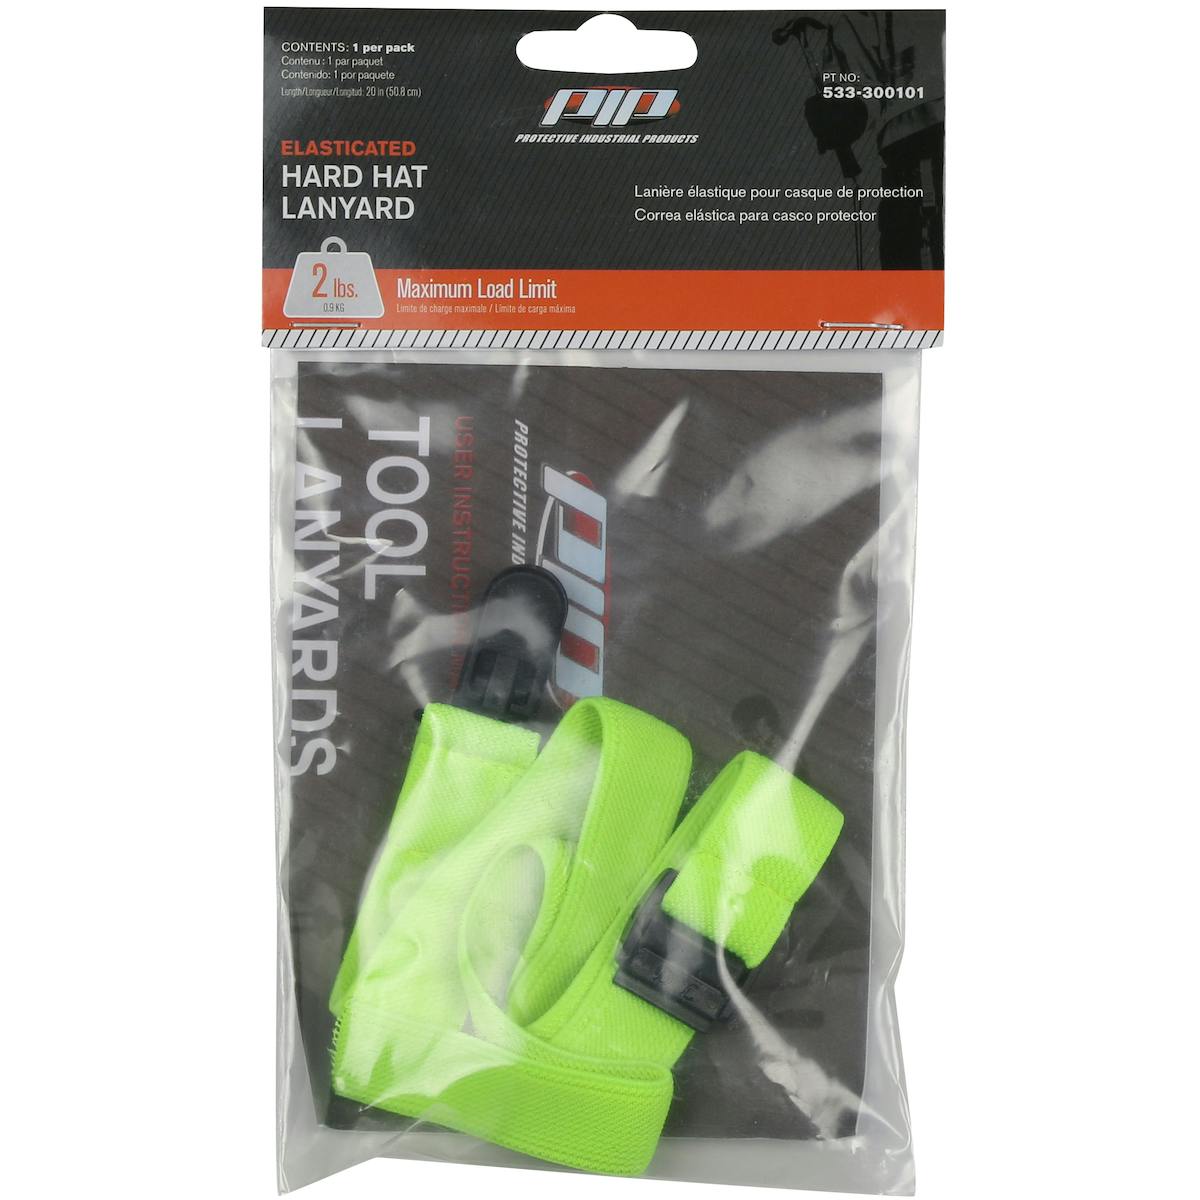 Hard Hat Lanyard - 2 lbs. maximum load limit - Retail Packaged, Lime (533-300101) - OS_0